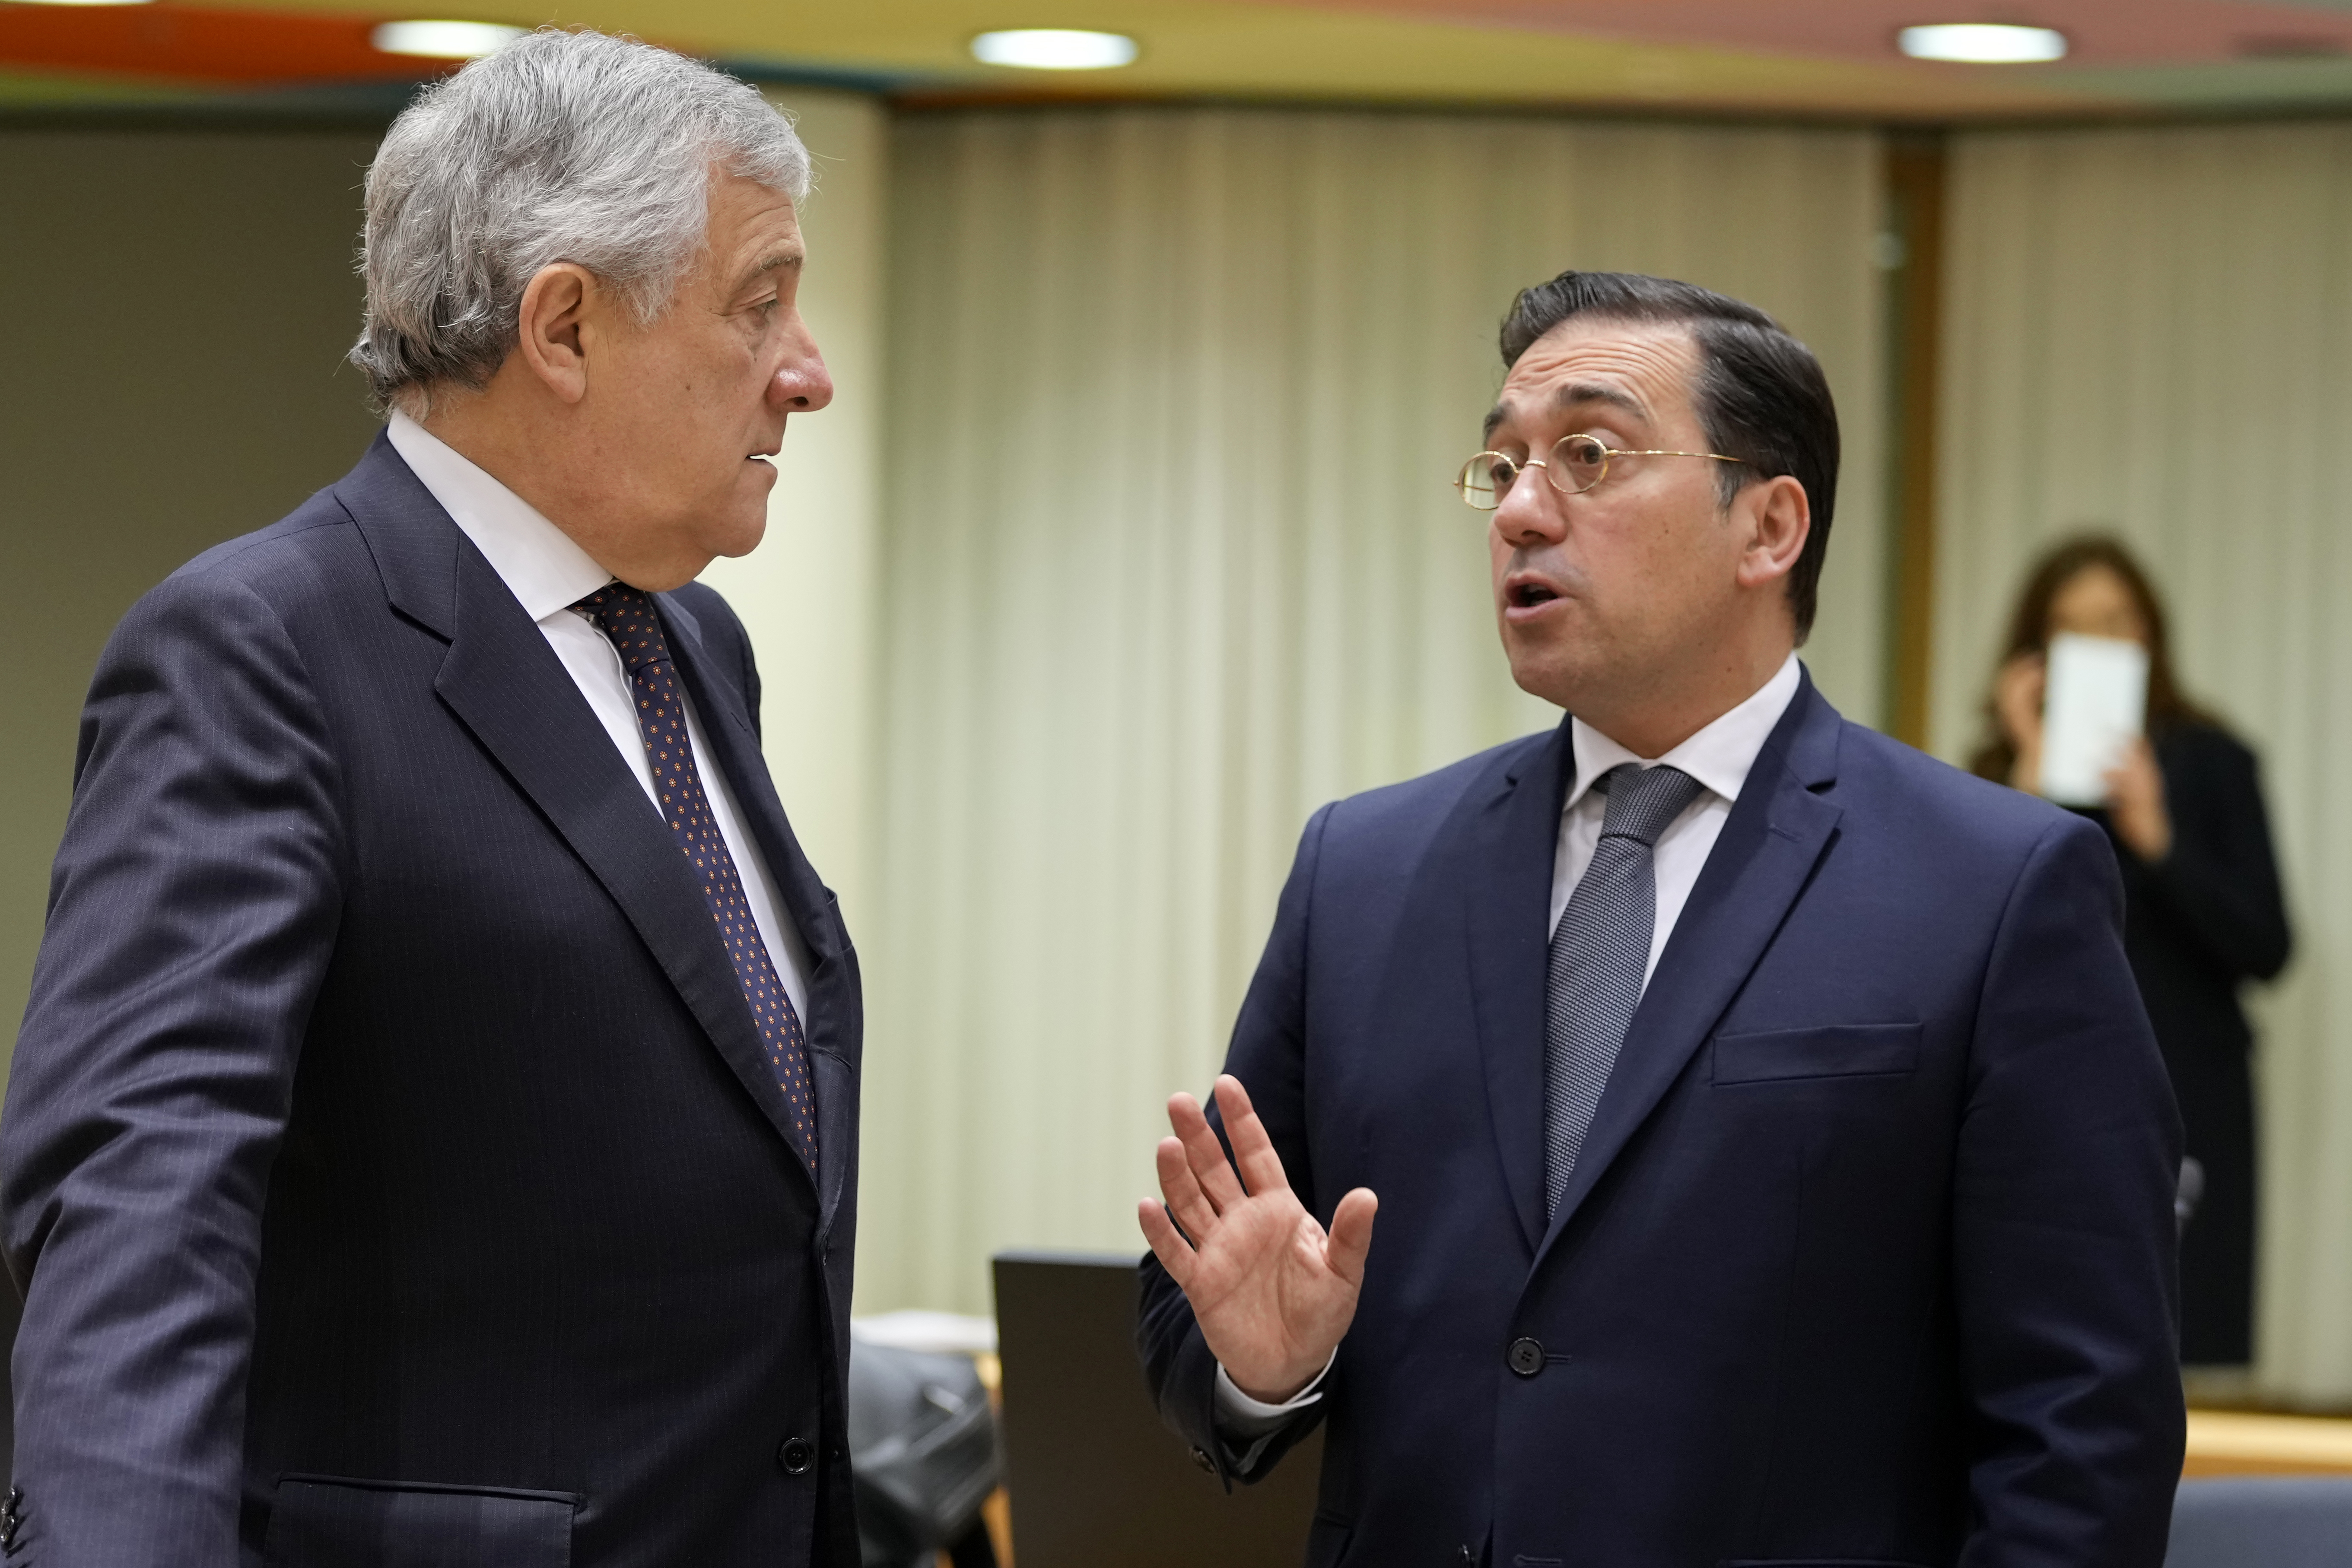 Spanish Foreign Minister José Manuel Albares Bueno, right, talks with his Italian counterpart Antonio Tajani during a meeting between EU foreign ministers in Brussels, Monday, Feb. 20, 2023. (AP Photo/Virginia Mayo)